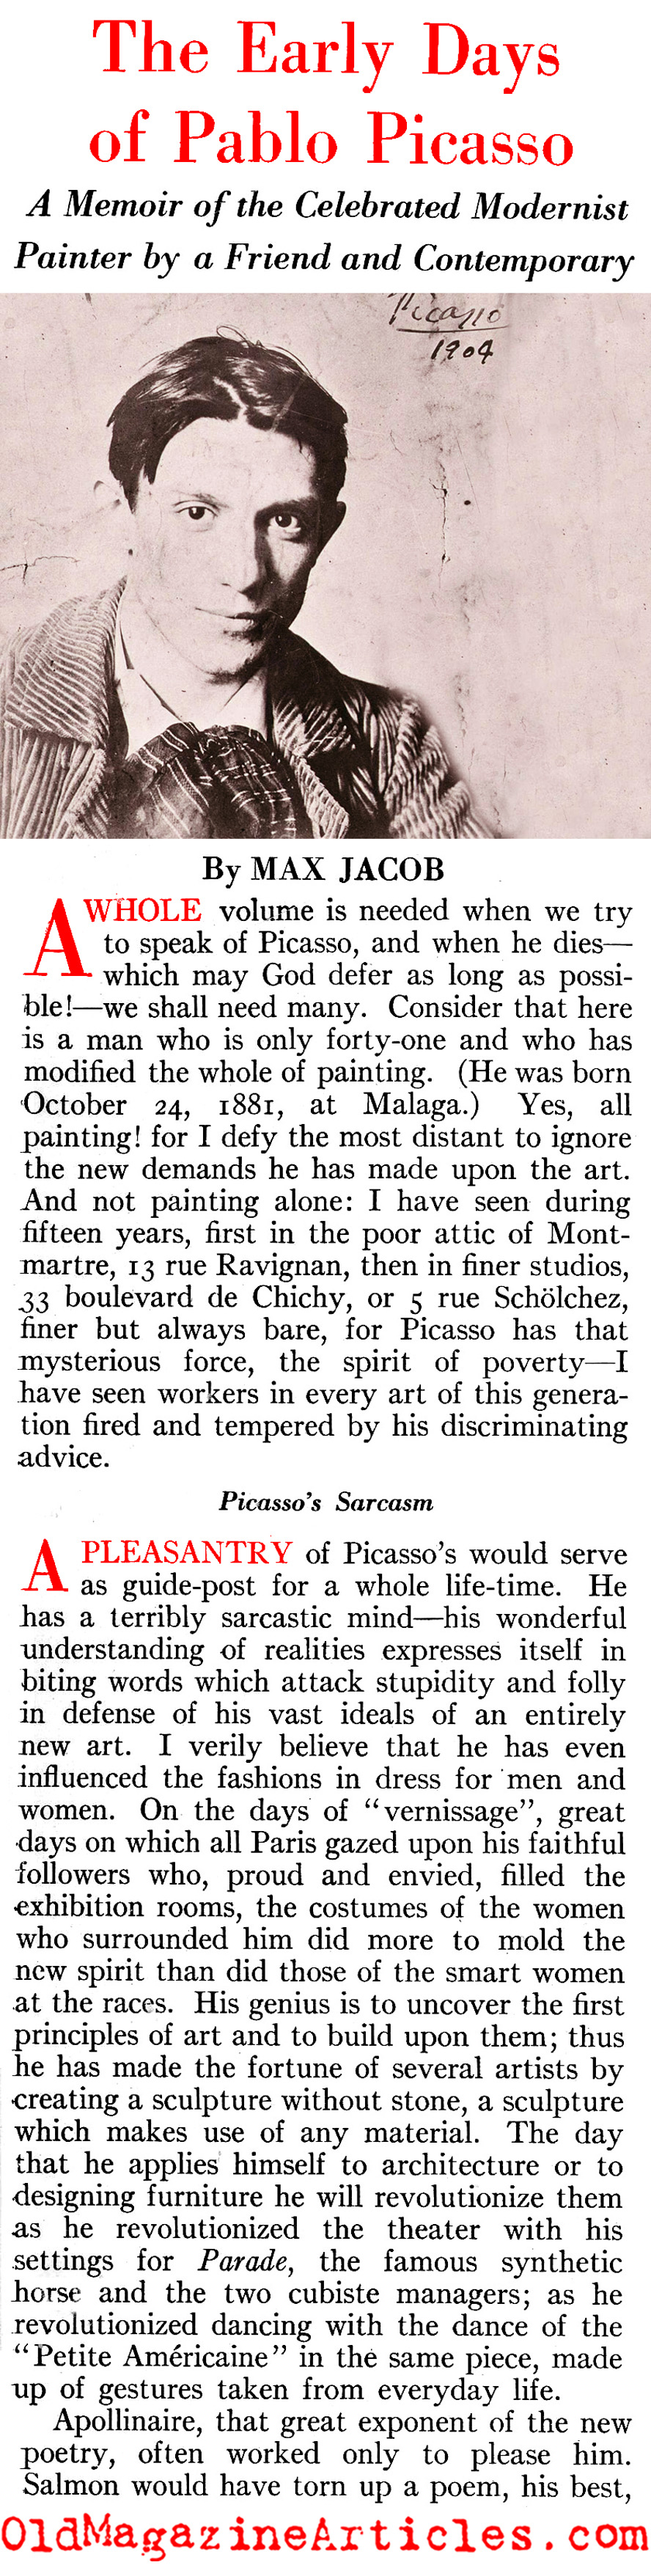 Young Picasso (Vanity Fair Magazine, 1923)